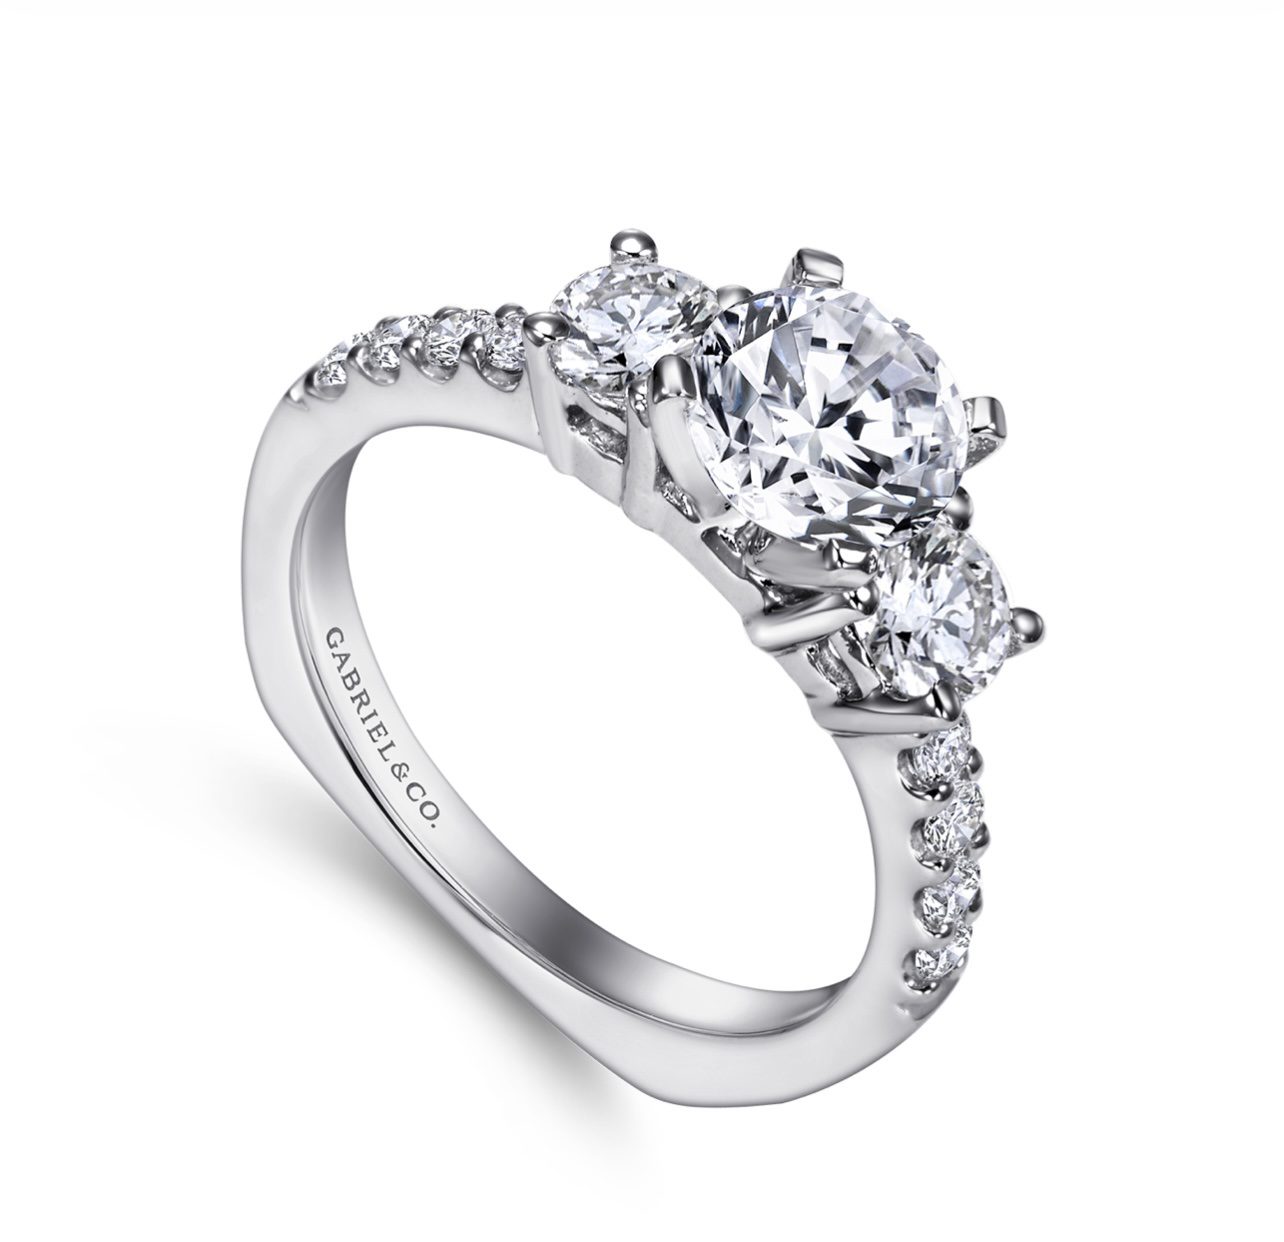 Platinum Solitaire Diamond Engagement Ring with Baguettes – Long's Jewelers